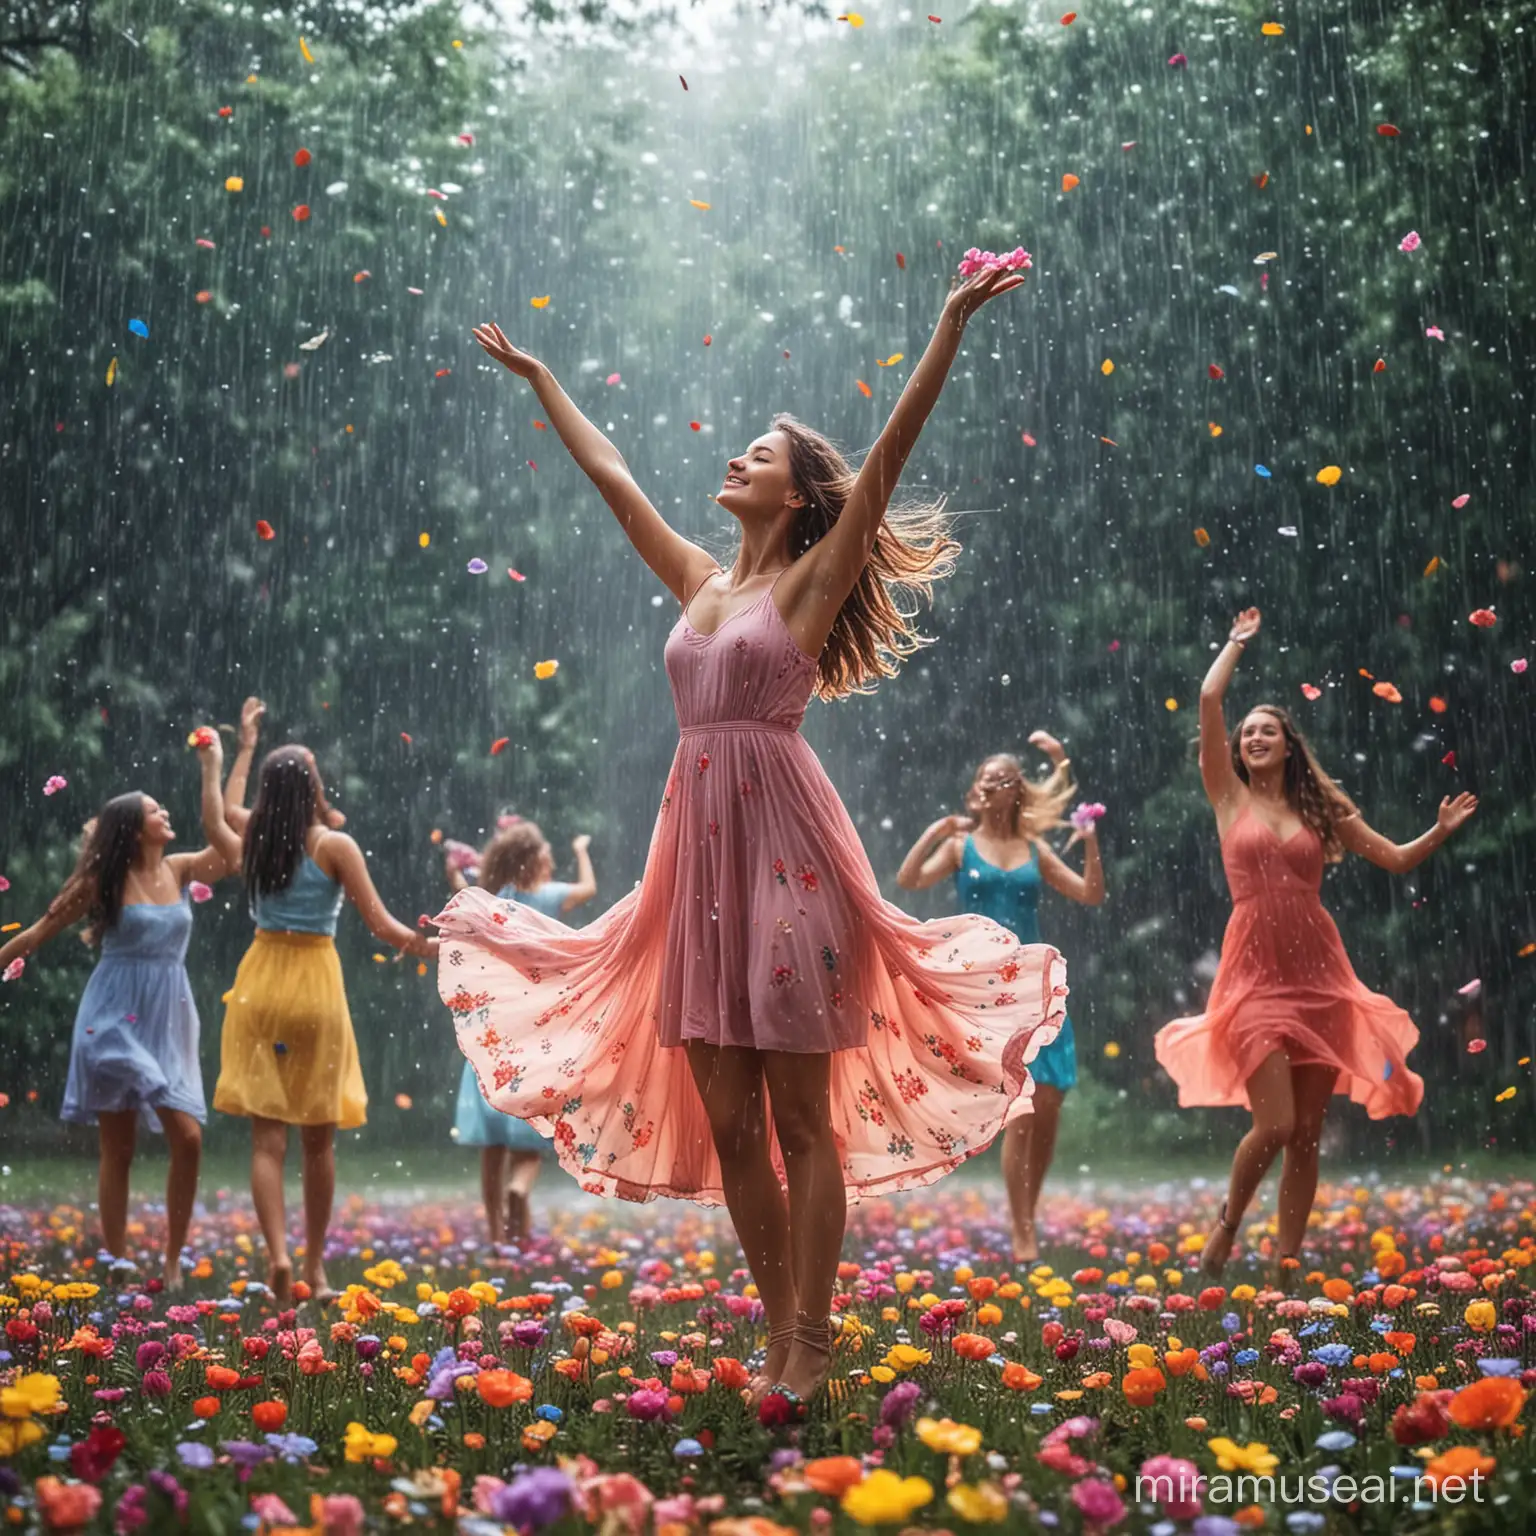 Colorful flowers are raining from the sky and beautiful girls are dancing below